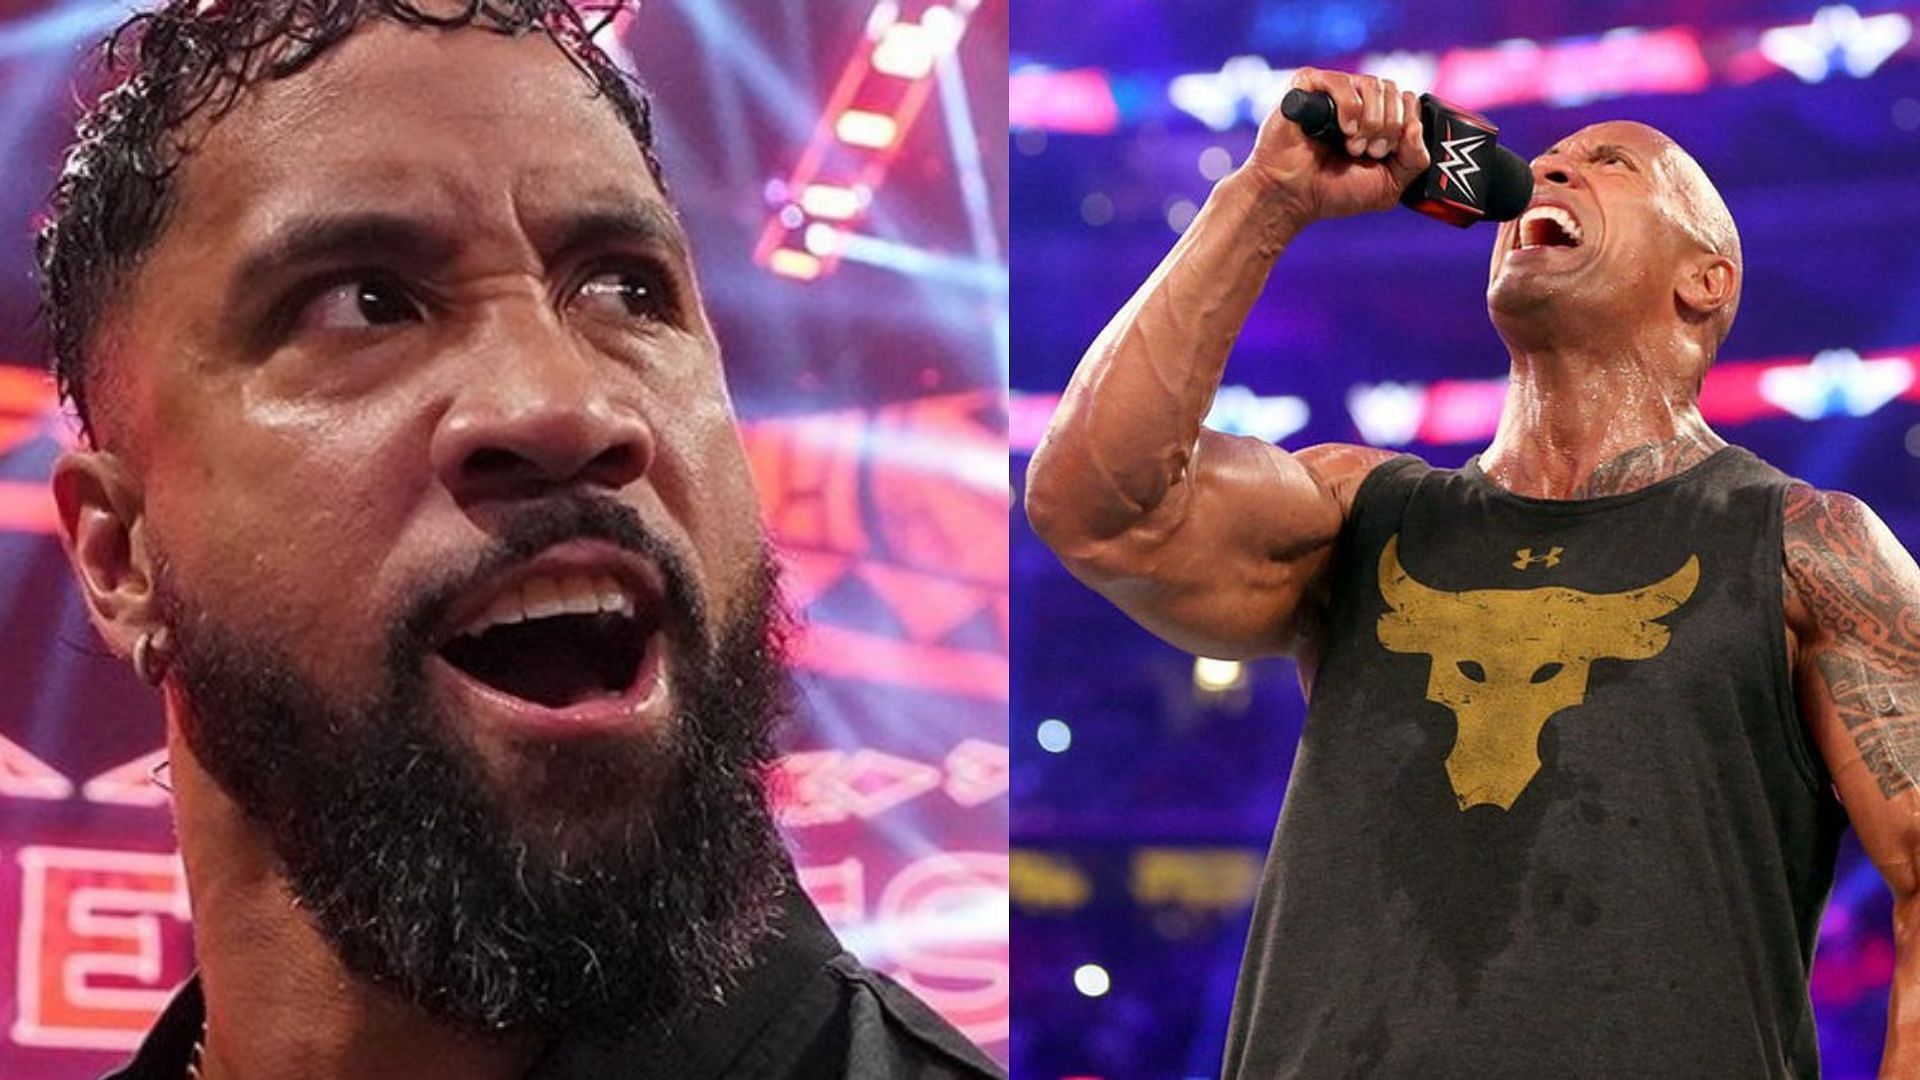 A look into Jey Uso and The Rock